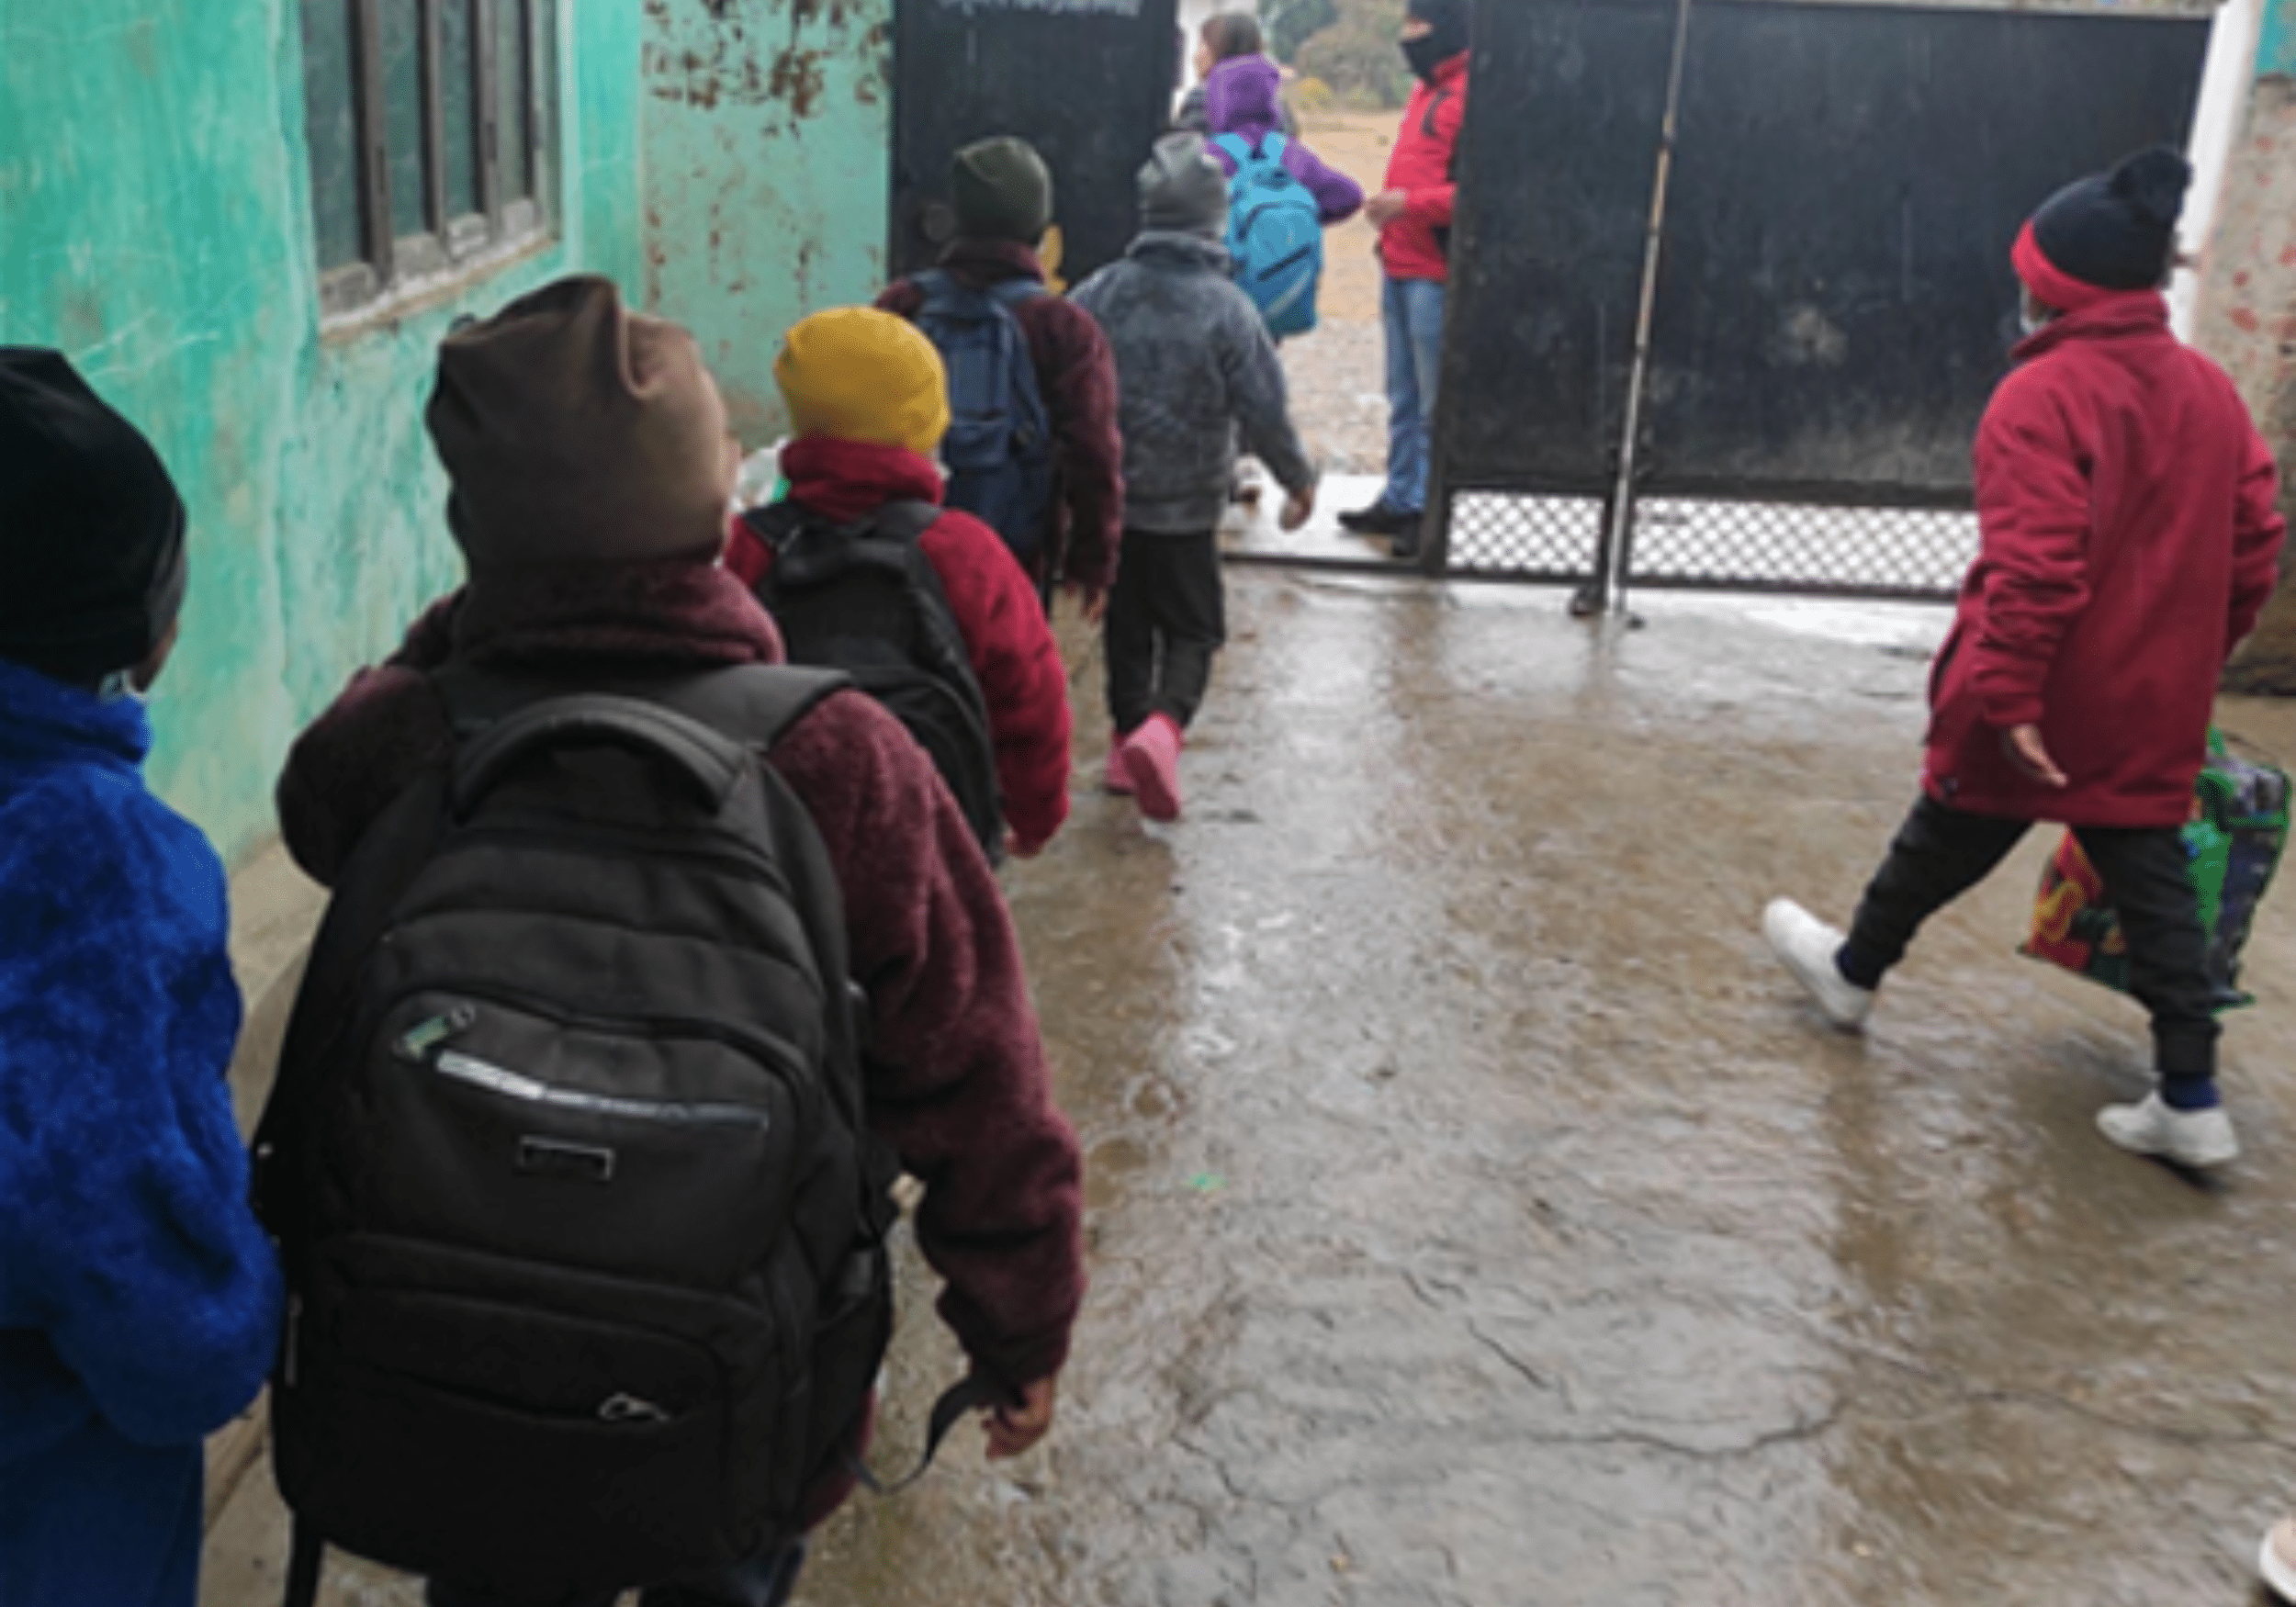 Several warmly dressed Nepali children troop out through an outside door of an orphanage, backs to the camera, wearing rucksacks